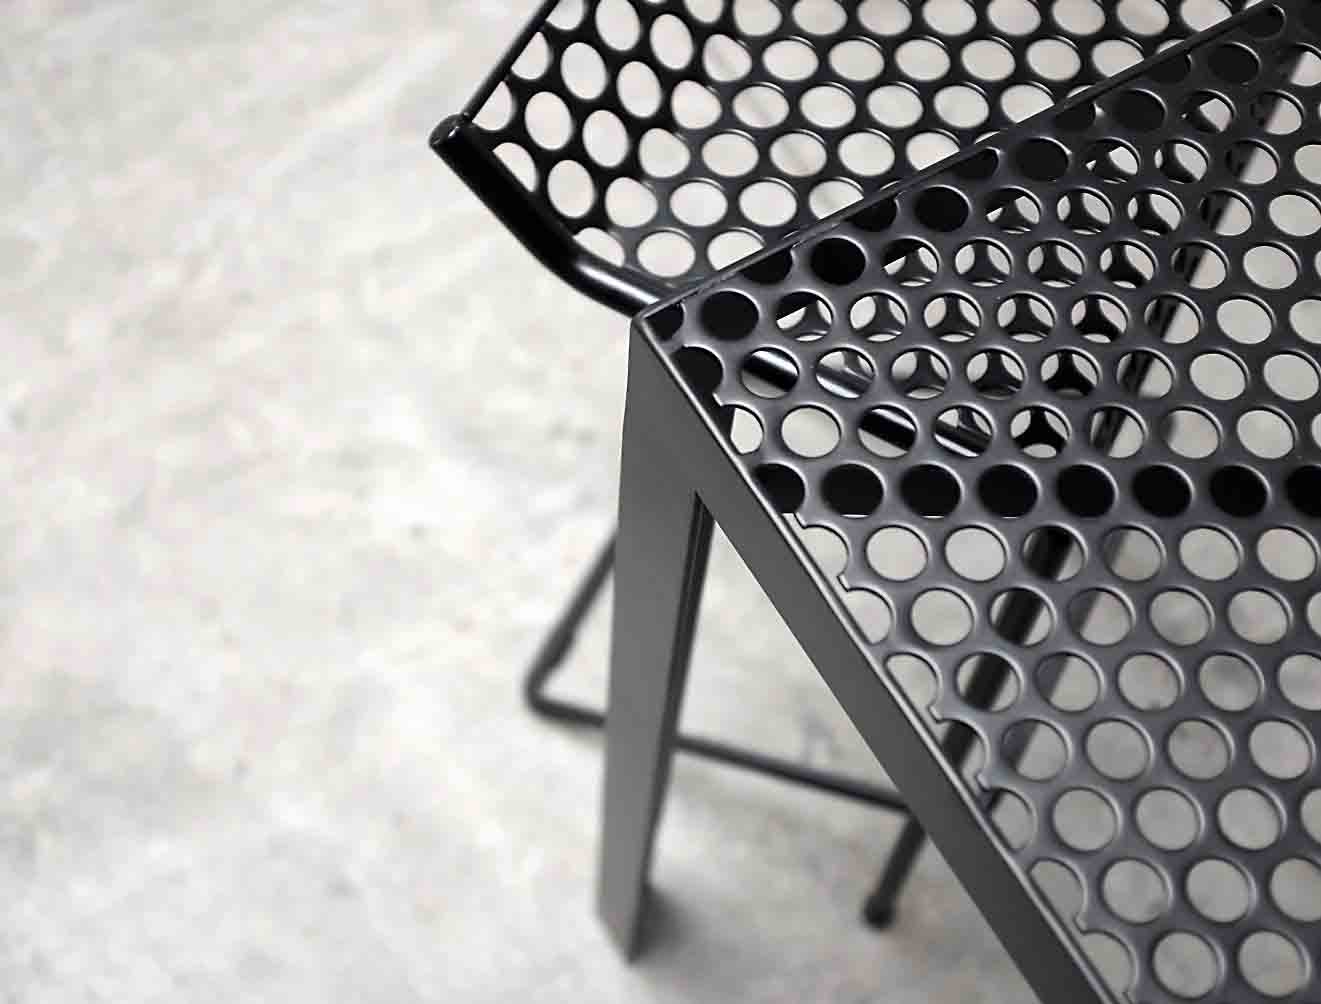 A close-up photo of a chair made out of Perforated Metal.